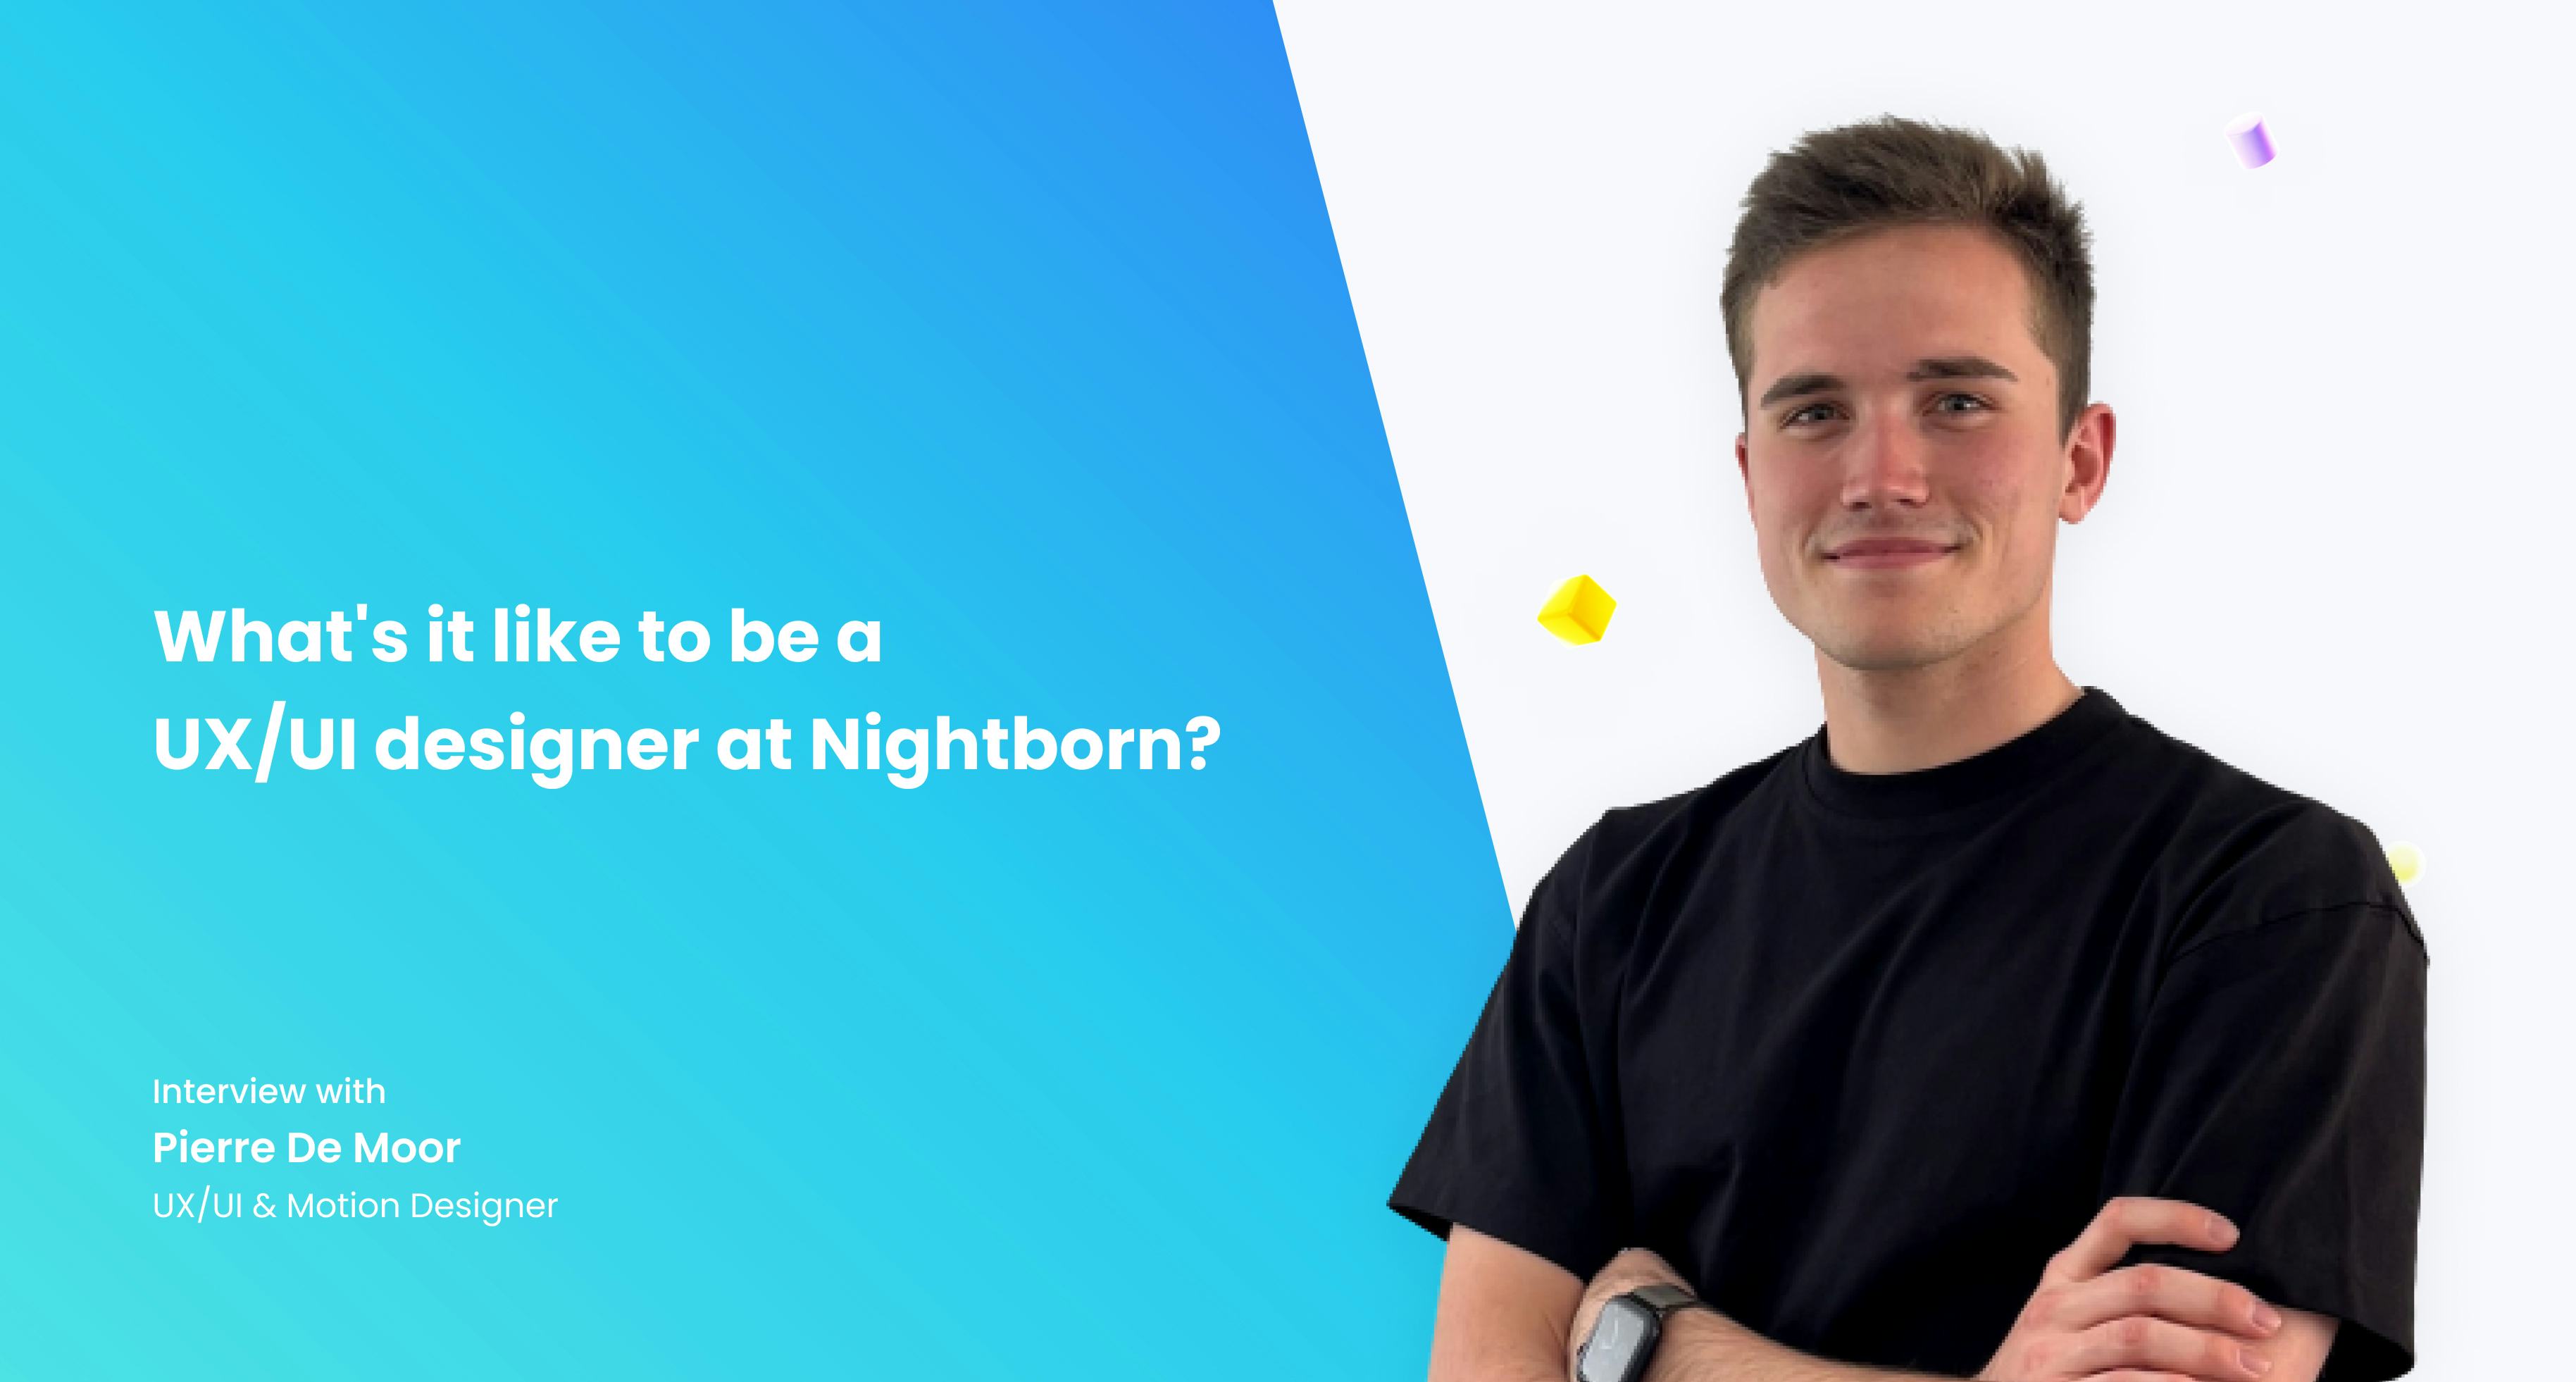 Nightborn - What's it like to be a UX/UI designer at Nightborn